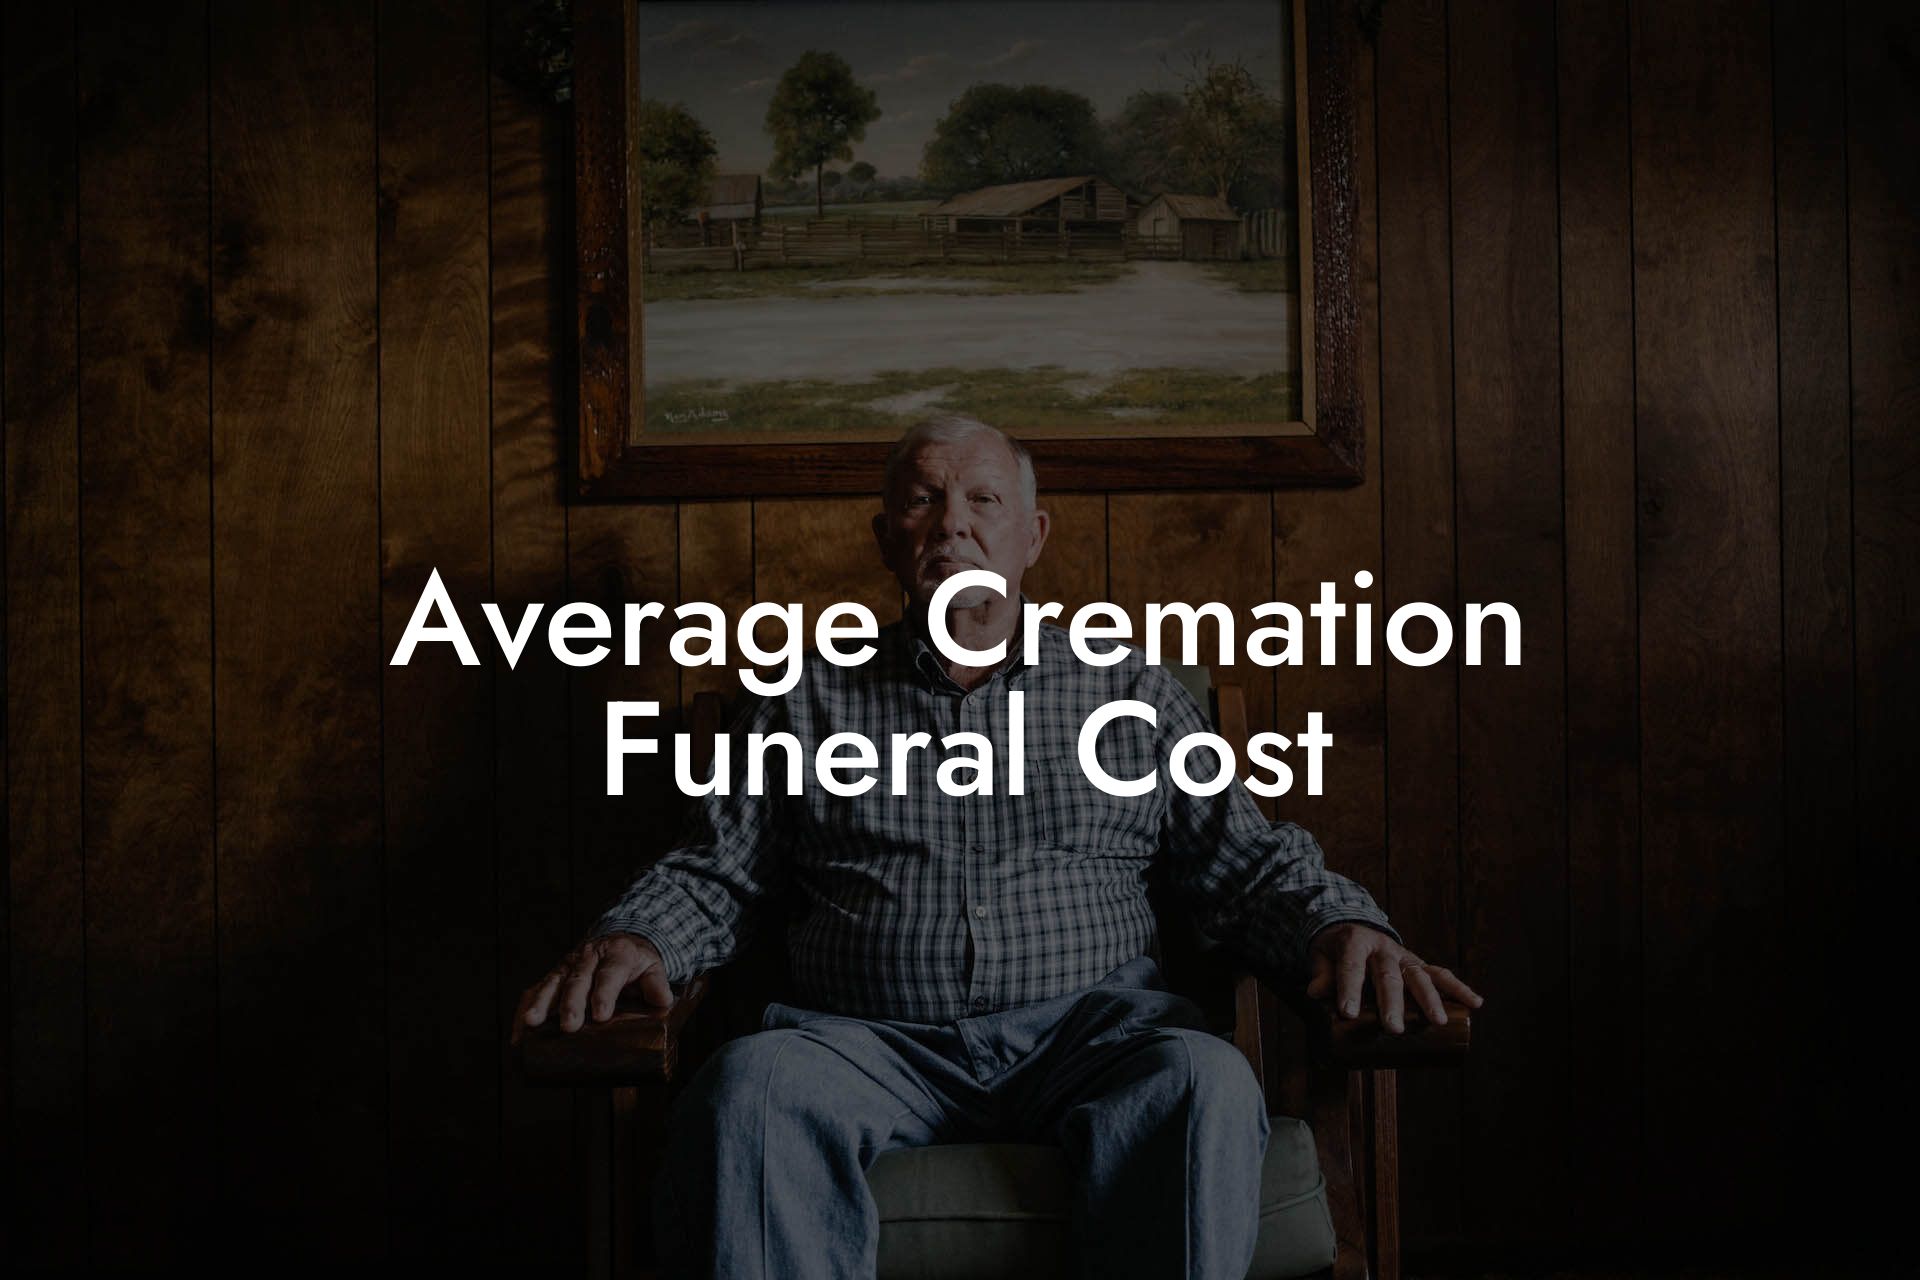 Average Cremation Funeral Cost